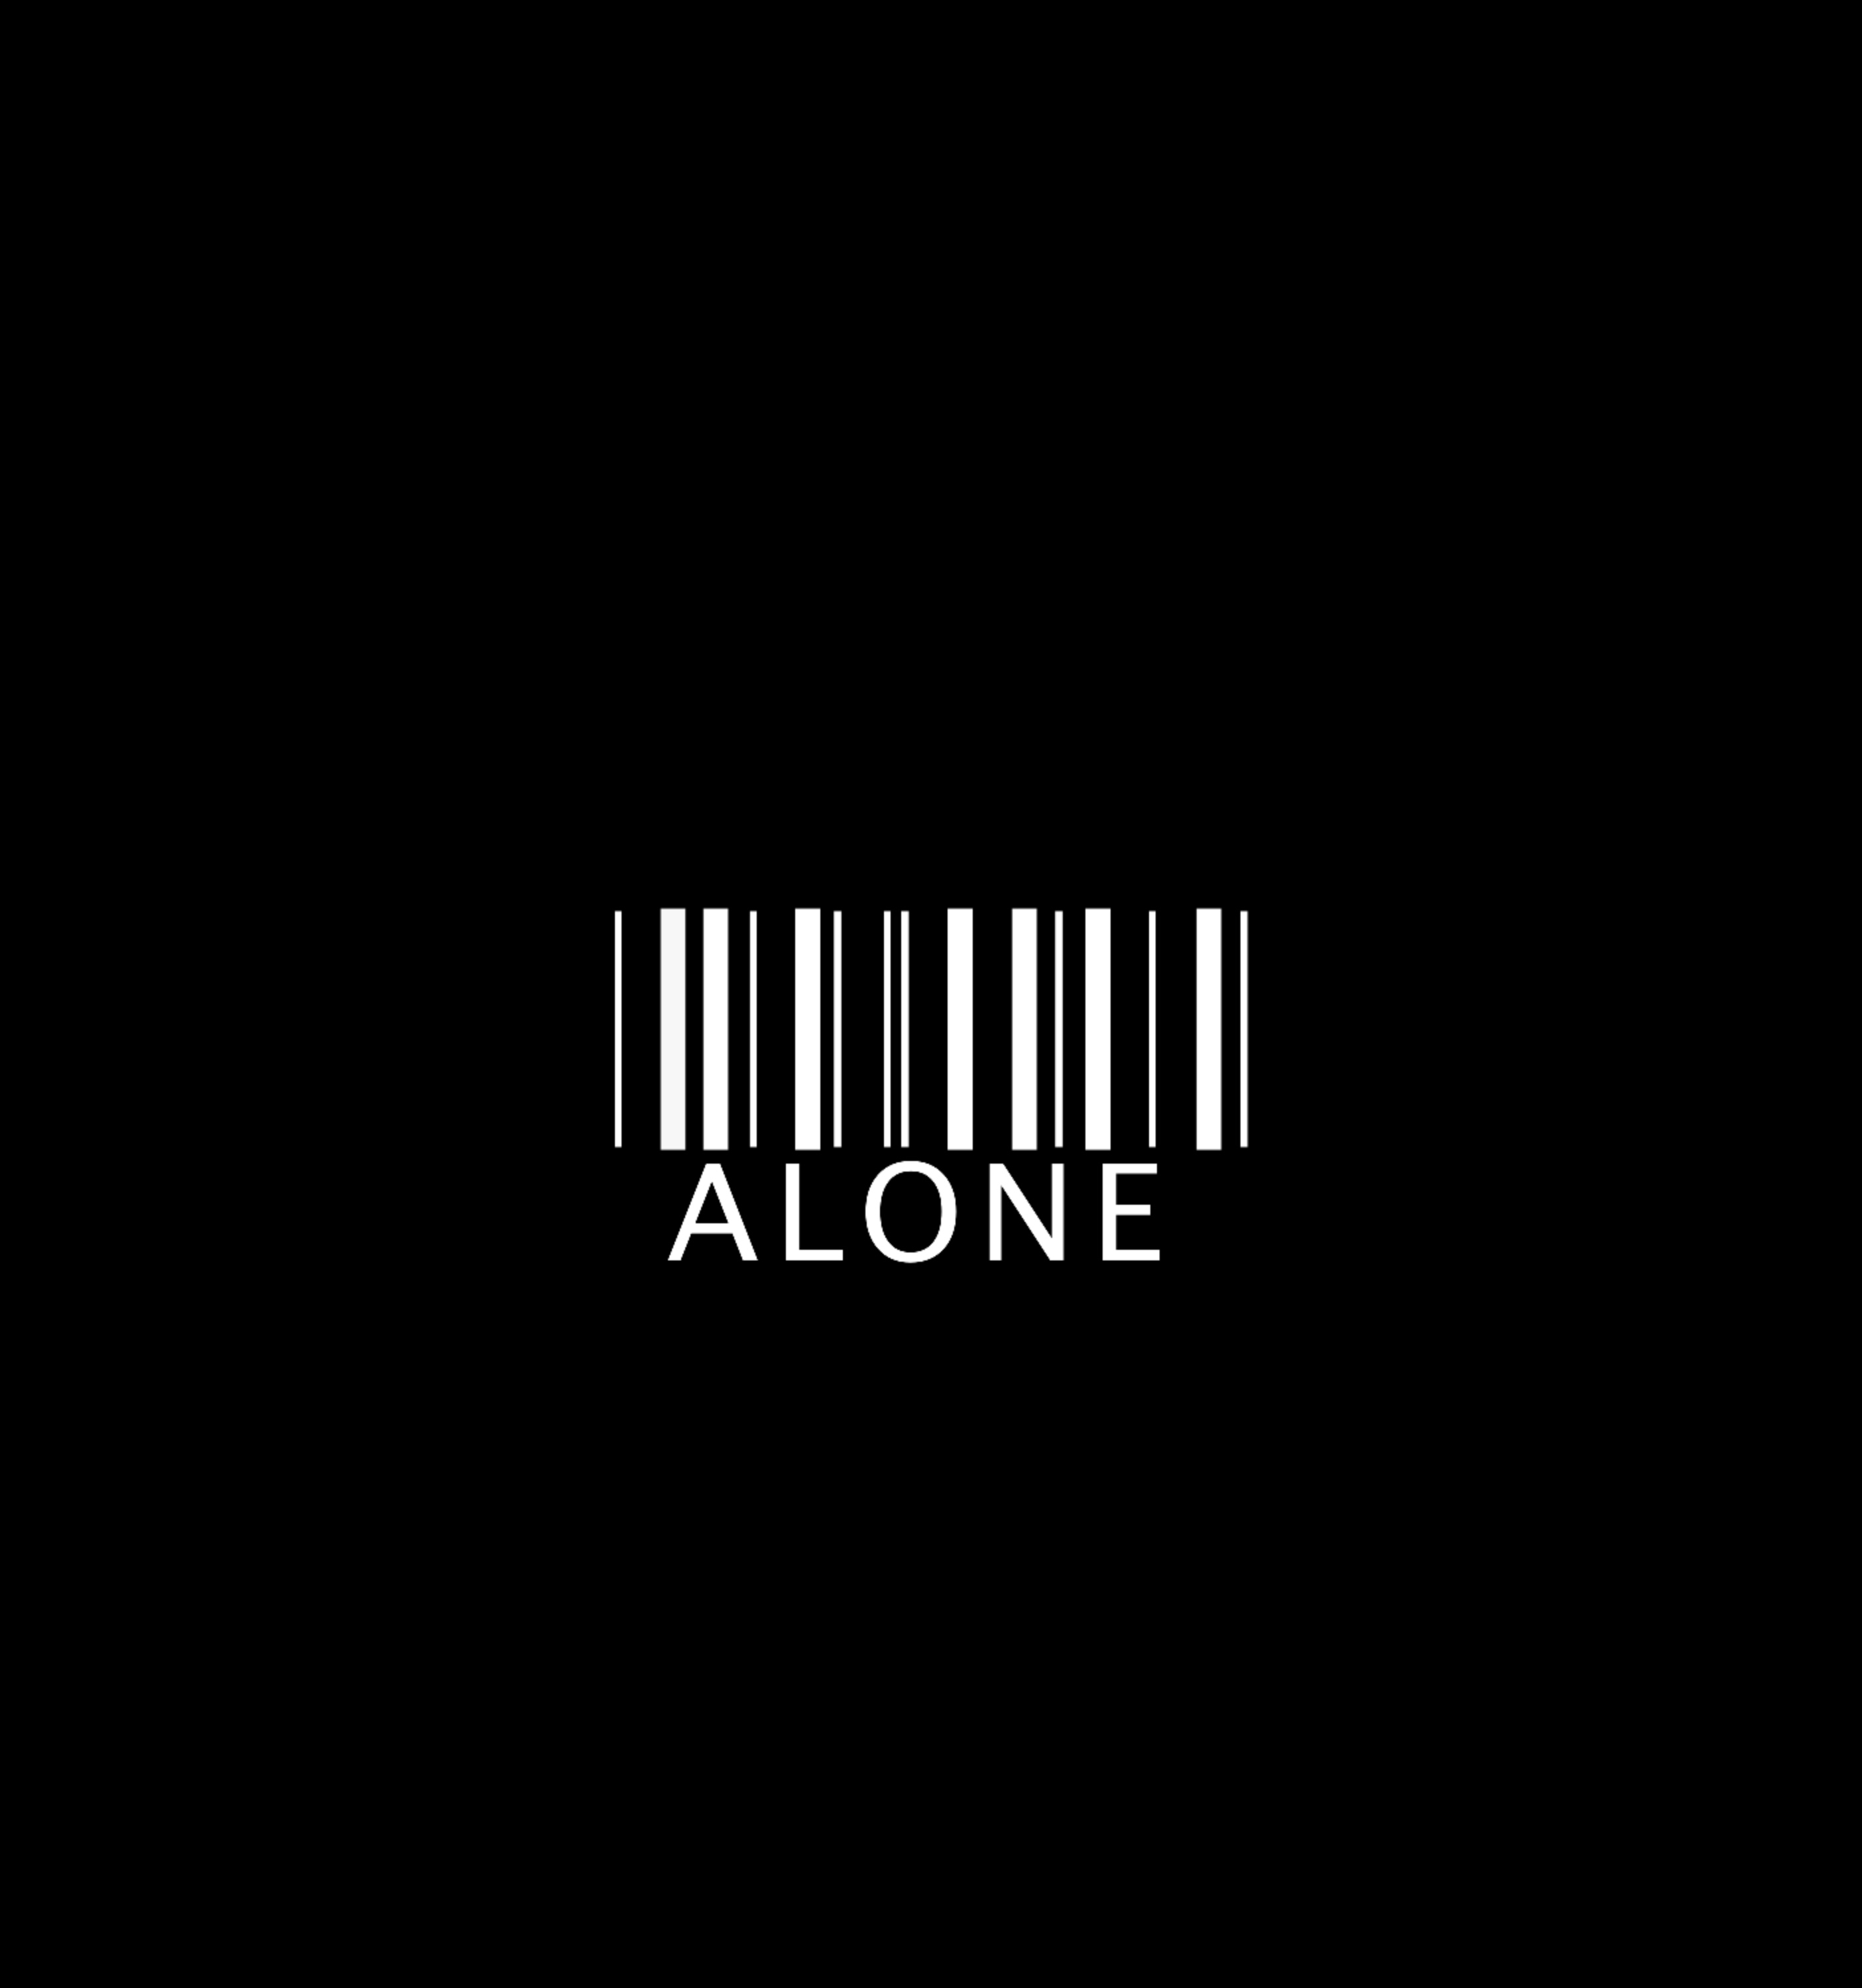 Widescreen image inscription, barcode, words, loneliness